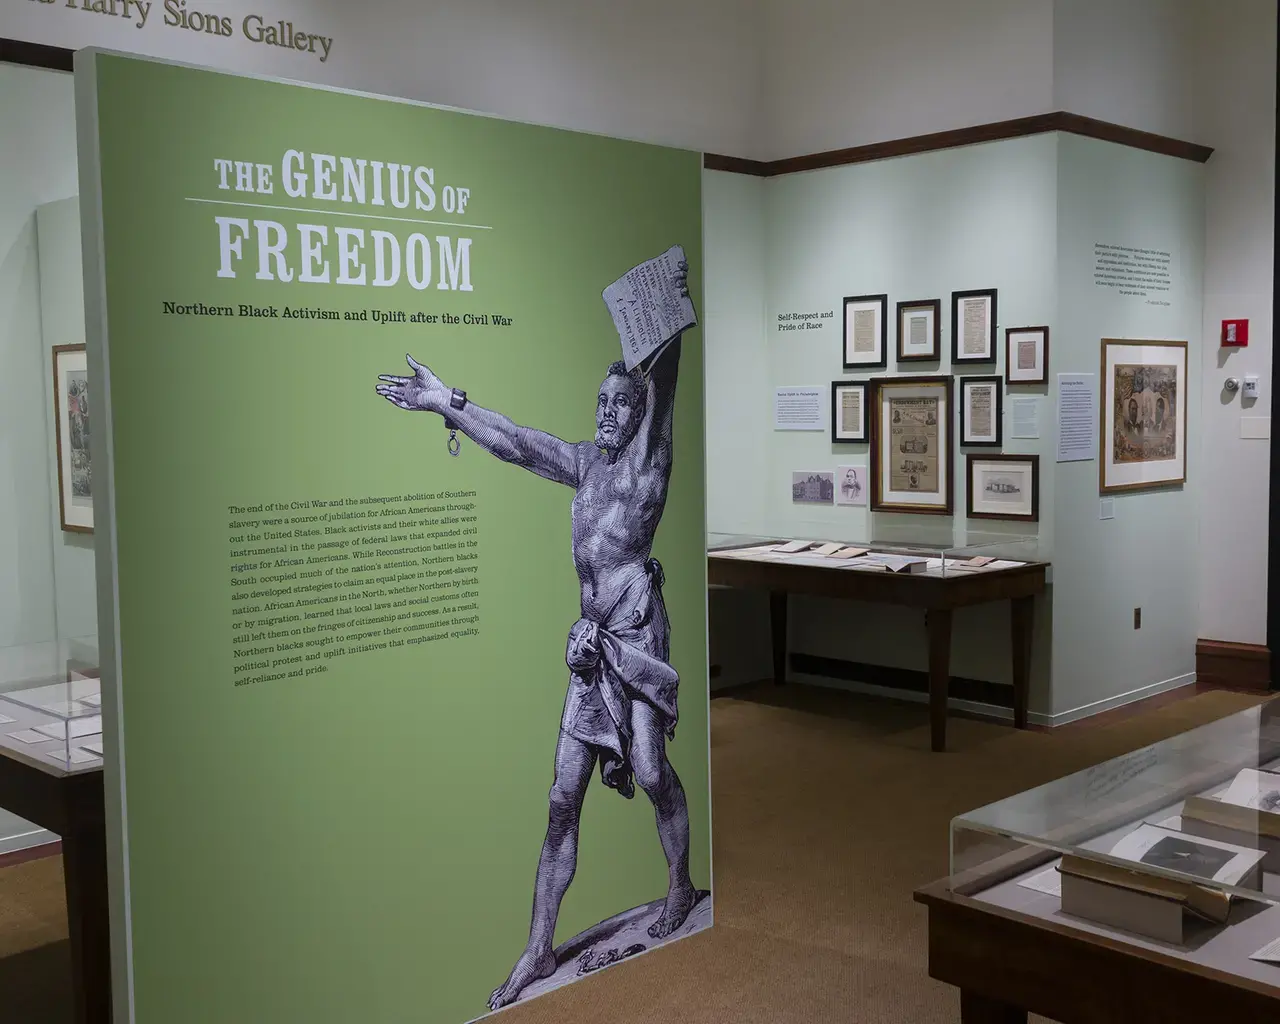 Genius of Freedom: Northern Black Activism and Uplift after the Civil War exhibition, 2014, Library Company of Philadelphia.